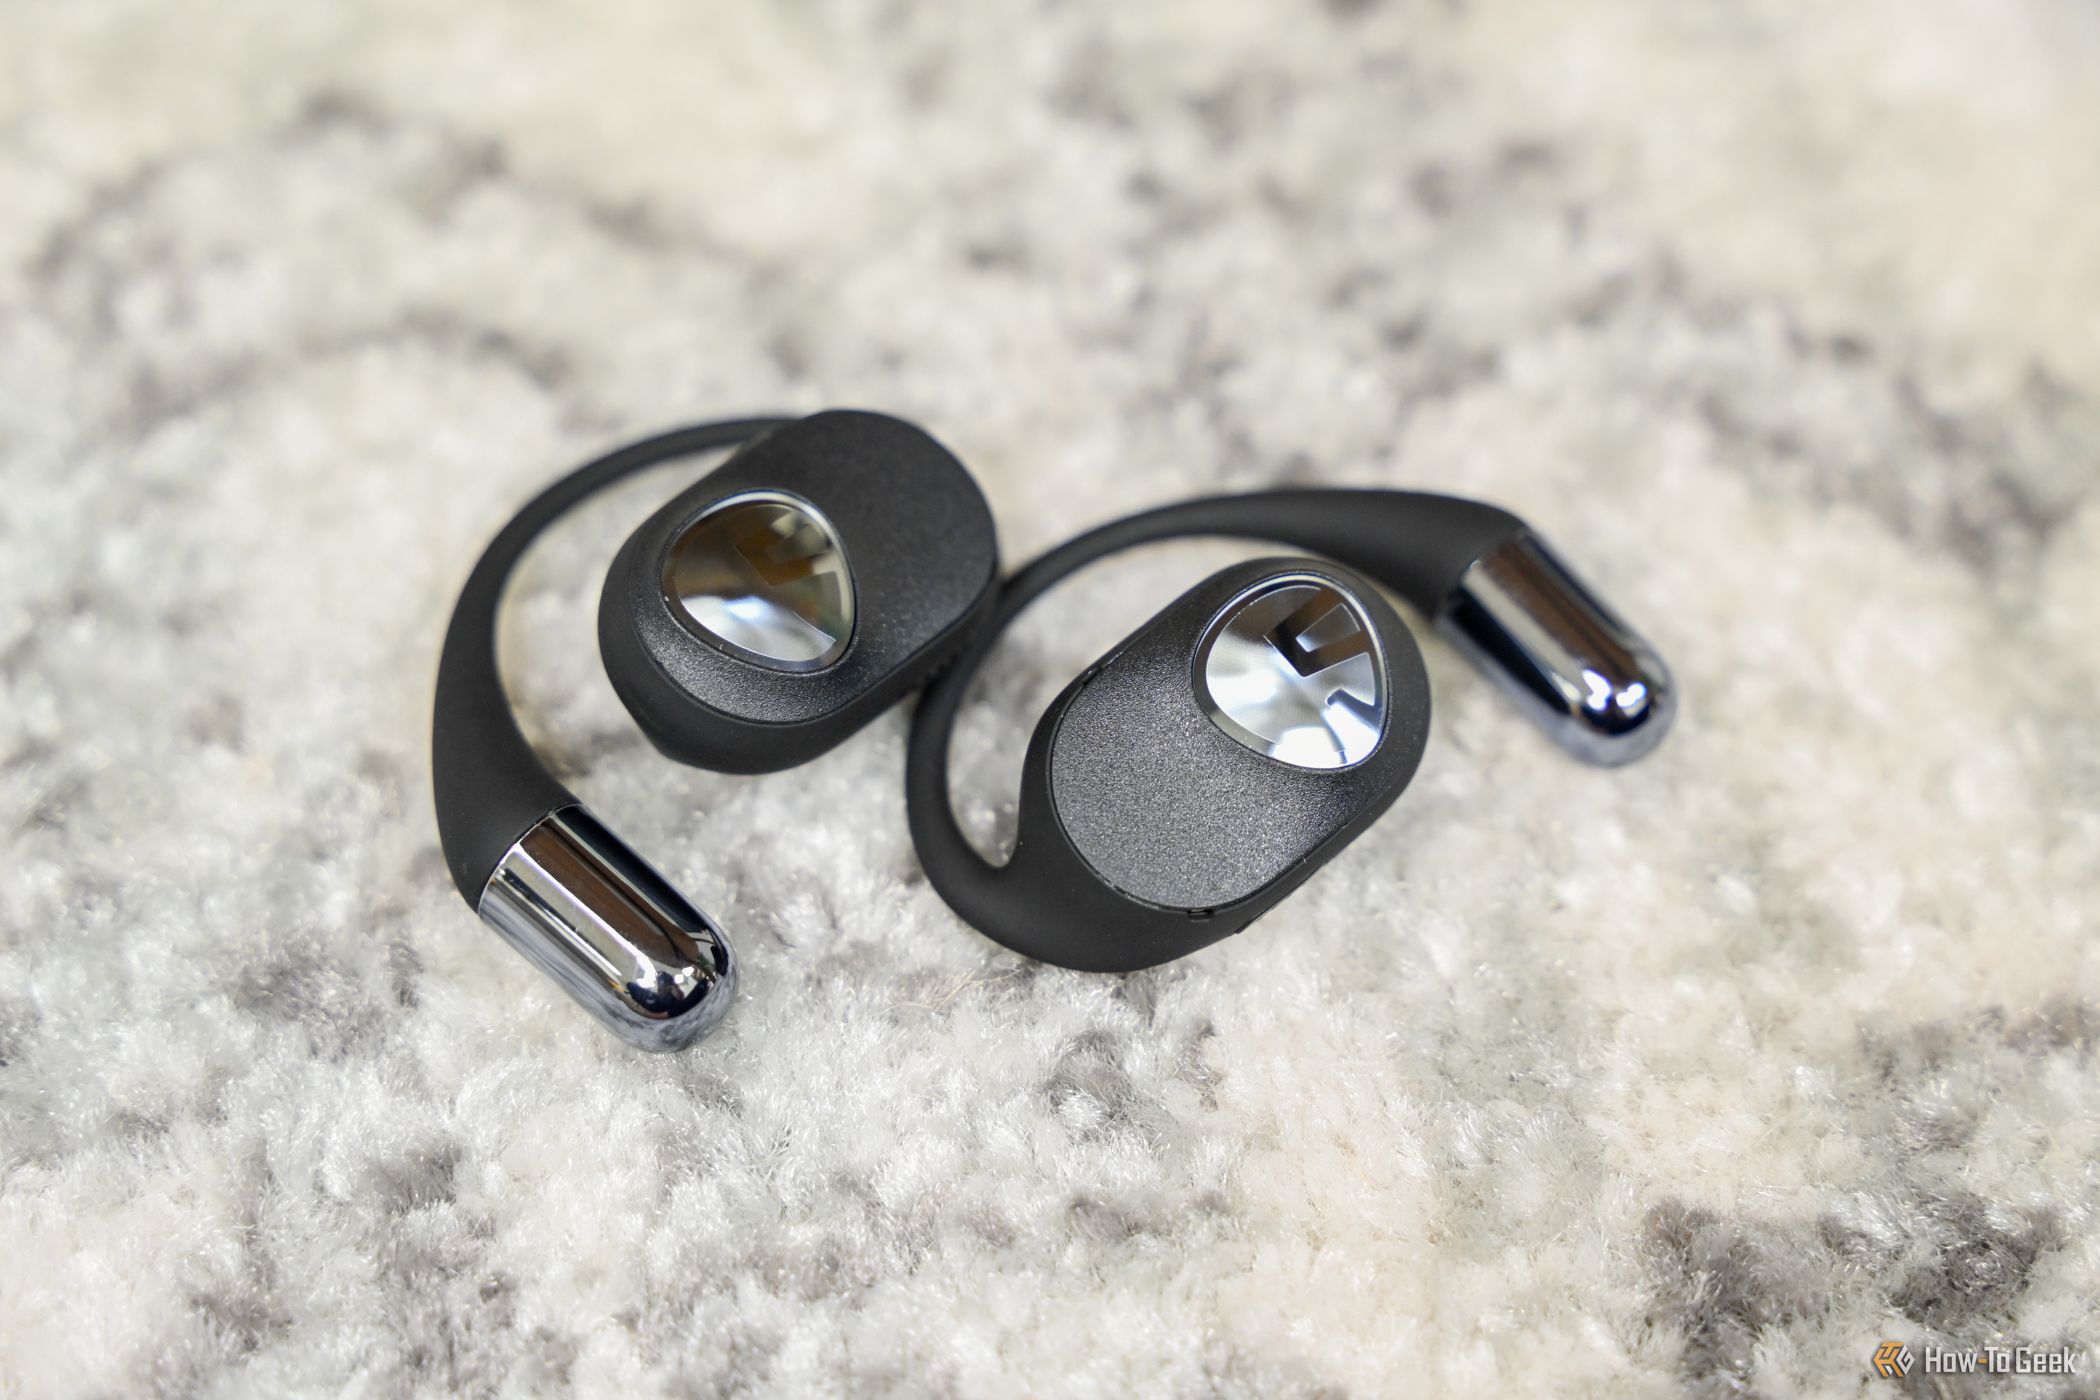 A pair of SoundPeats GoFree 2 earbuds